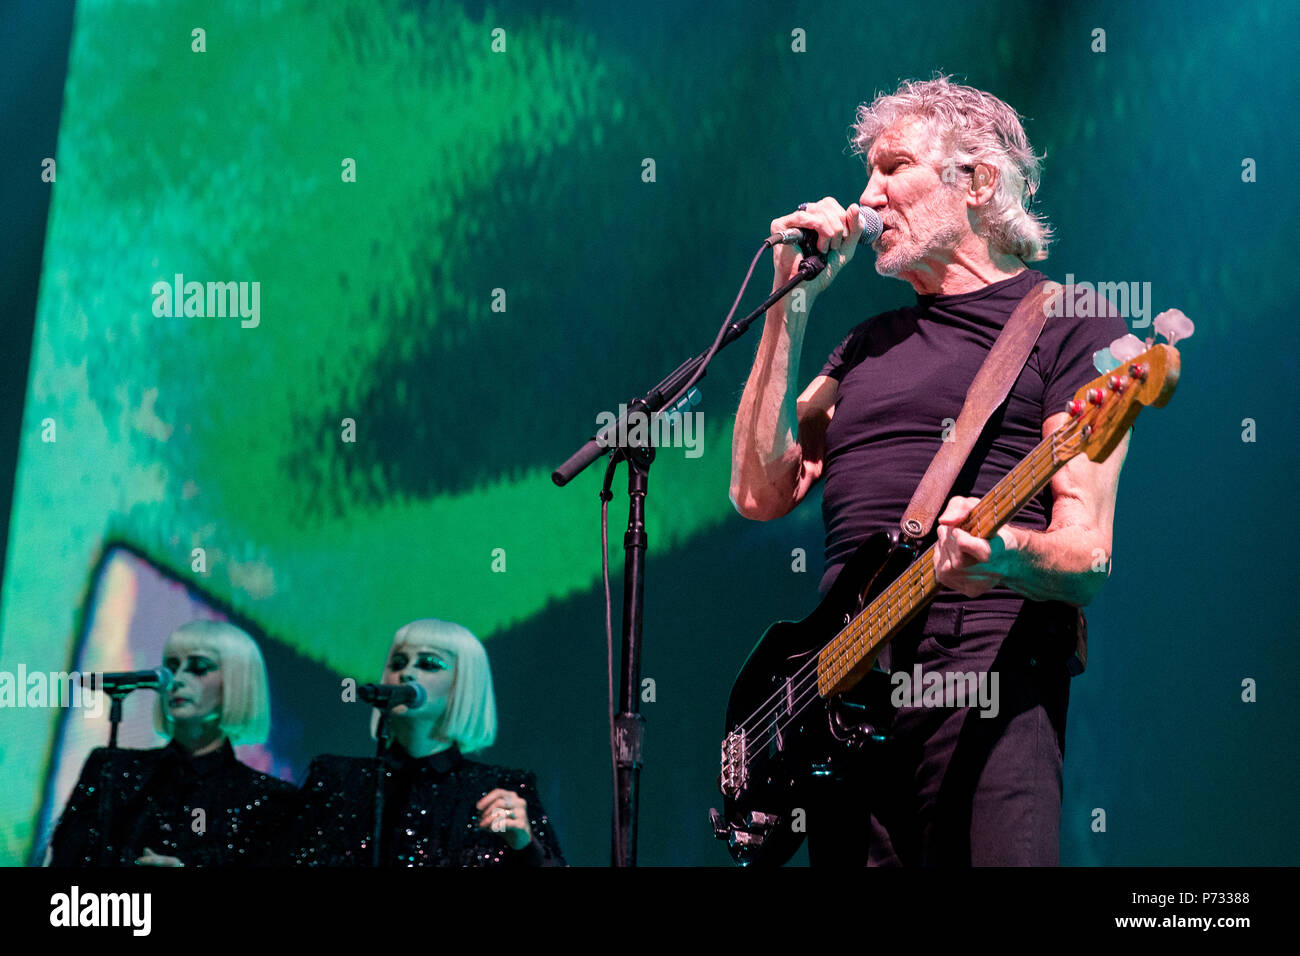 Roger Waters (Pink Floyd) performs live on stage during his Us + Them tour at the Manchester Arena in Manchester, UK, 3rd June 2018. Stock Photo